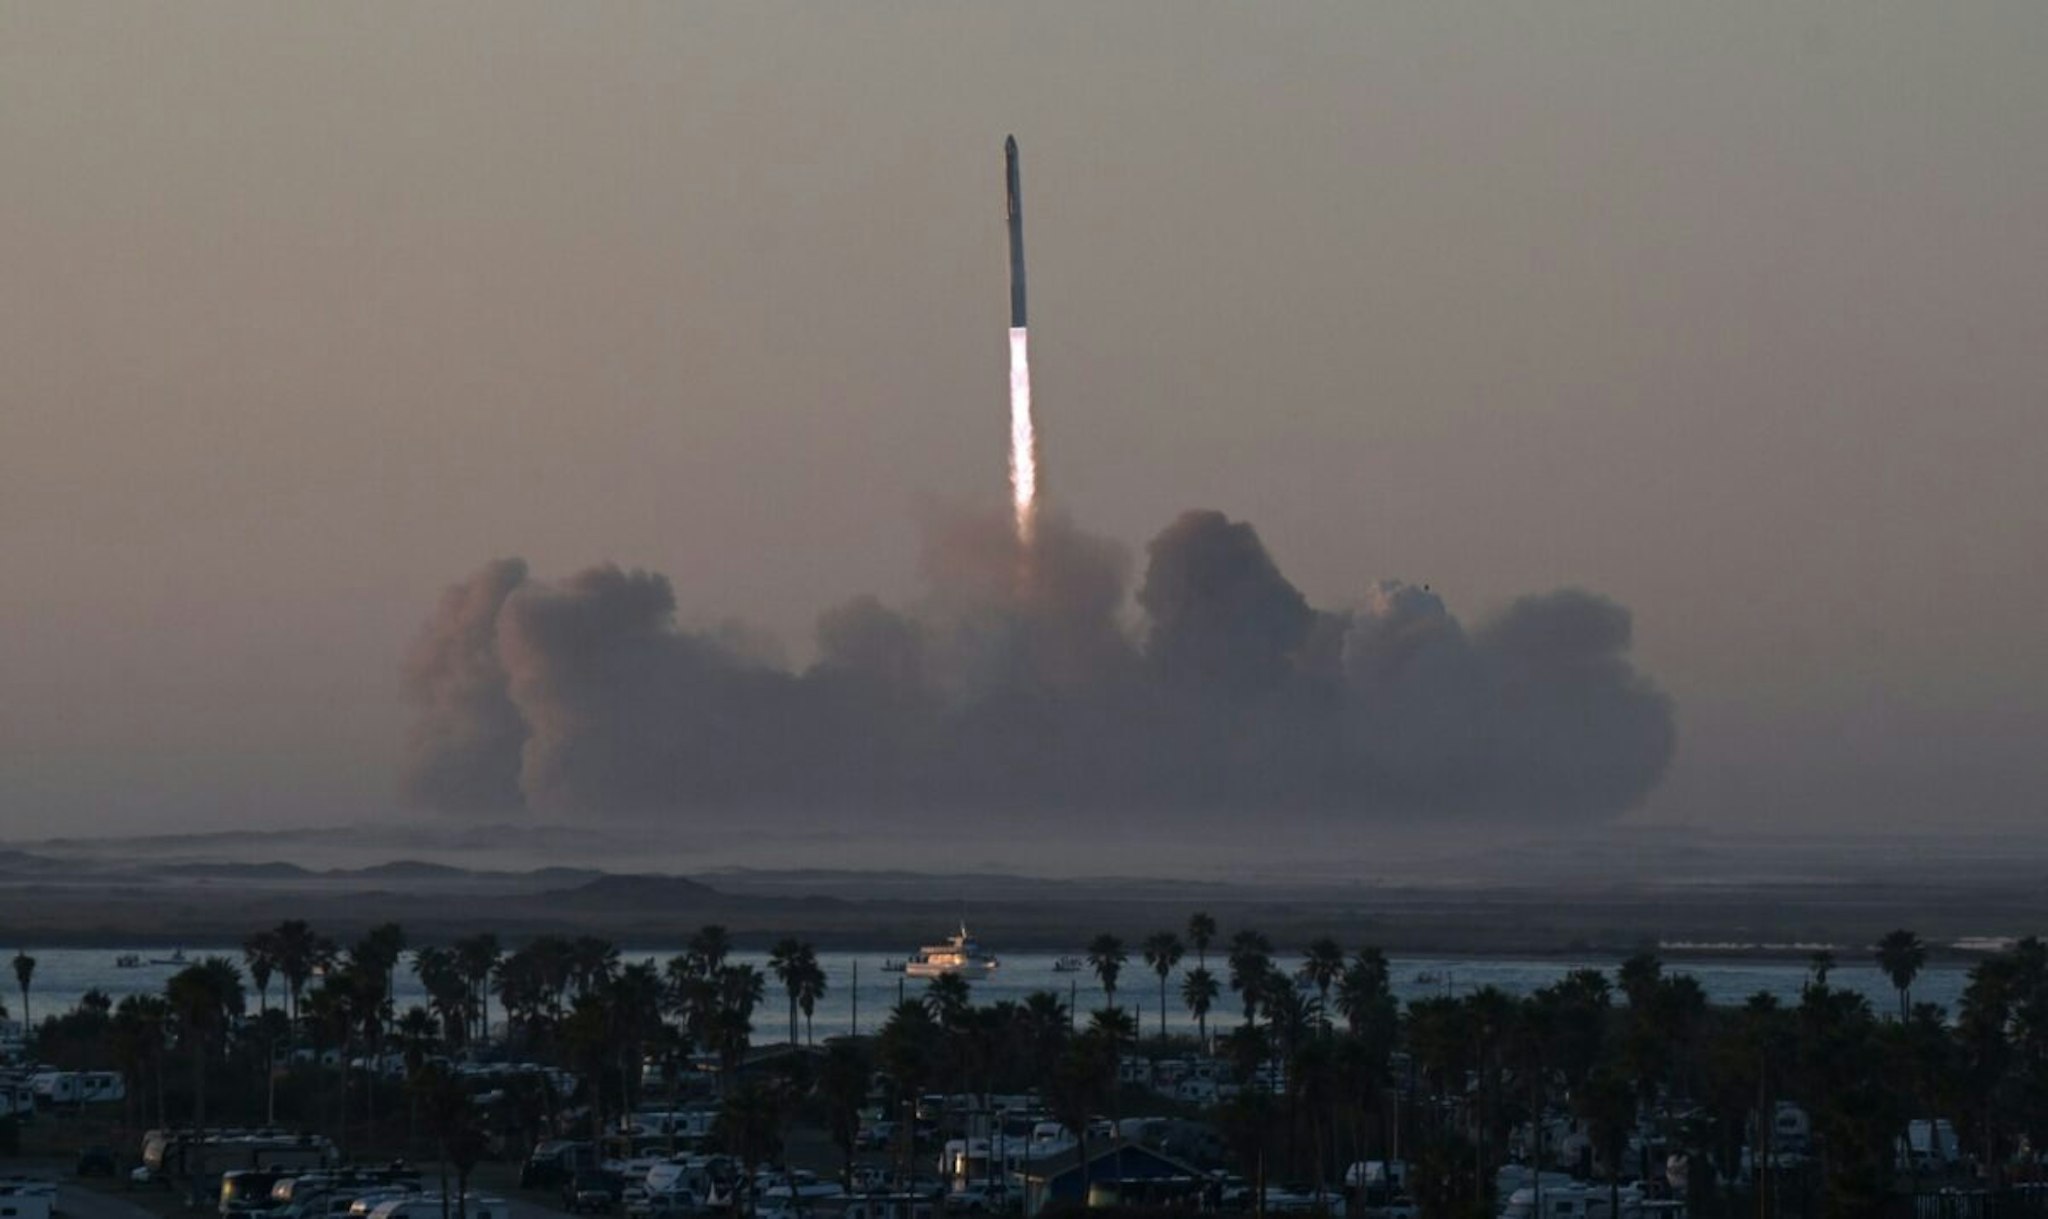 SpaceX's Starship rocket launches from Starbase during its second test flight in Boca Chica, Texas, on November 18, 2023. SpaceX on November 18, 2023, carried out the second test launch of Starship, the largest rocket ever built that Elon Musk hopes will one day colonize Mars, while NASA awaits a modified version to land humans on the Moon.